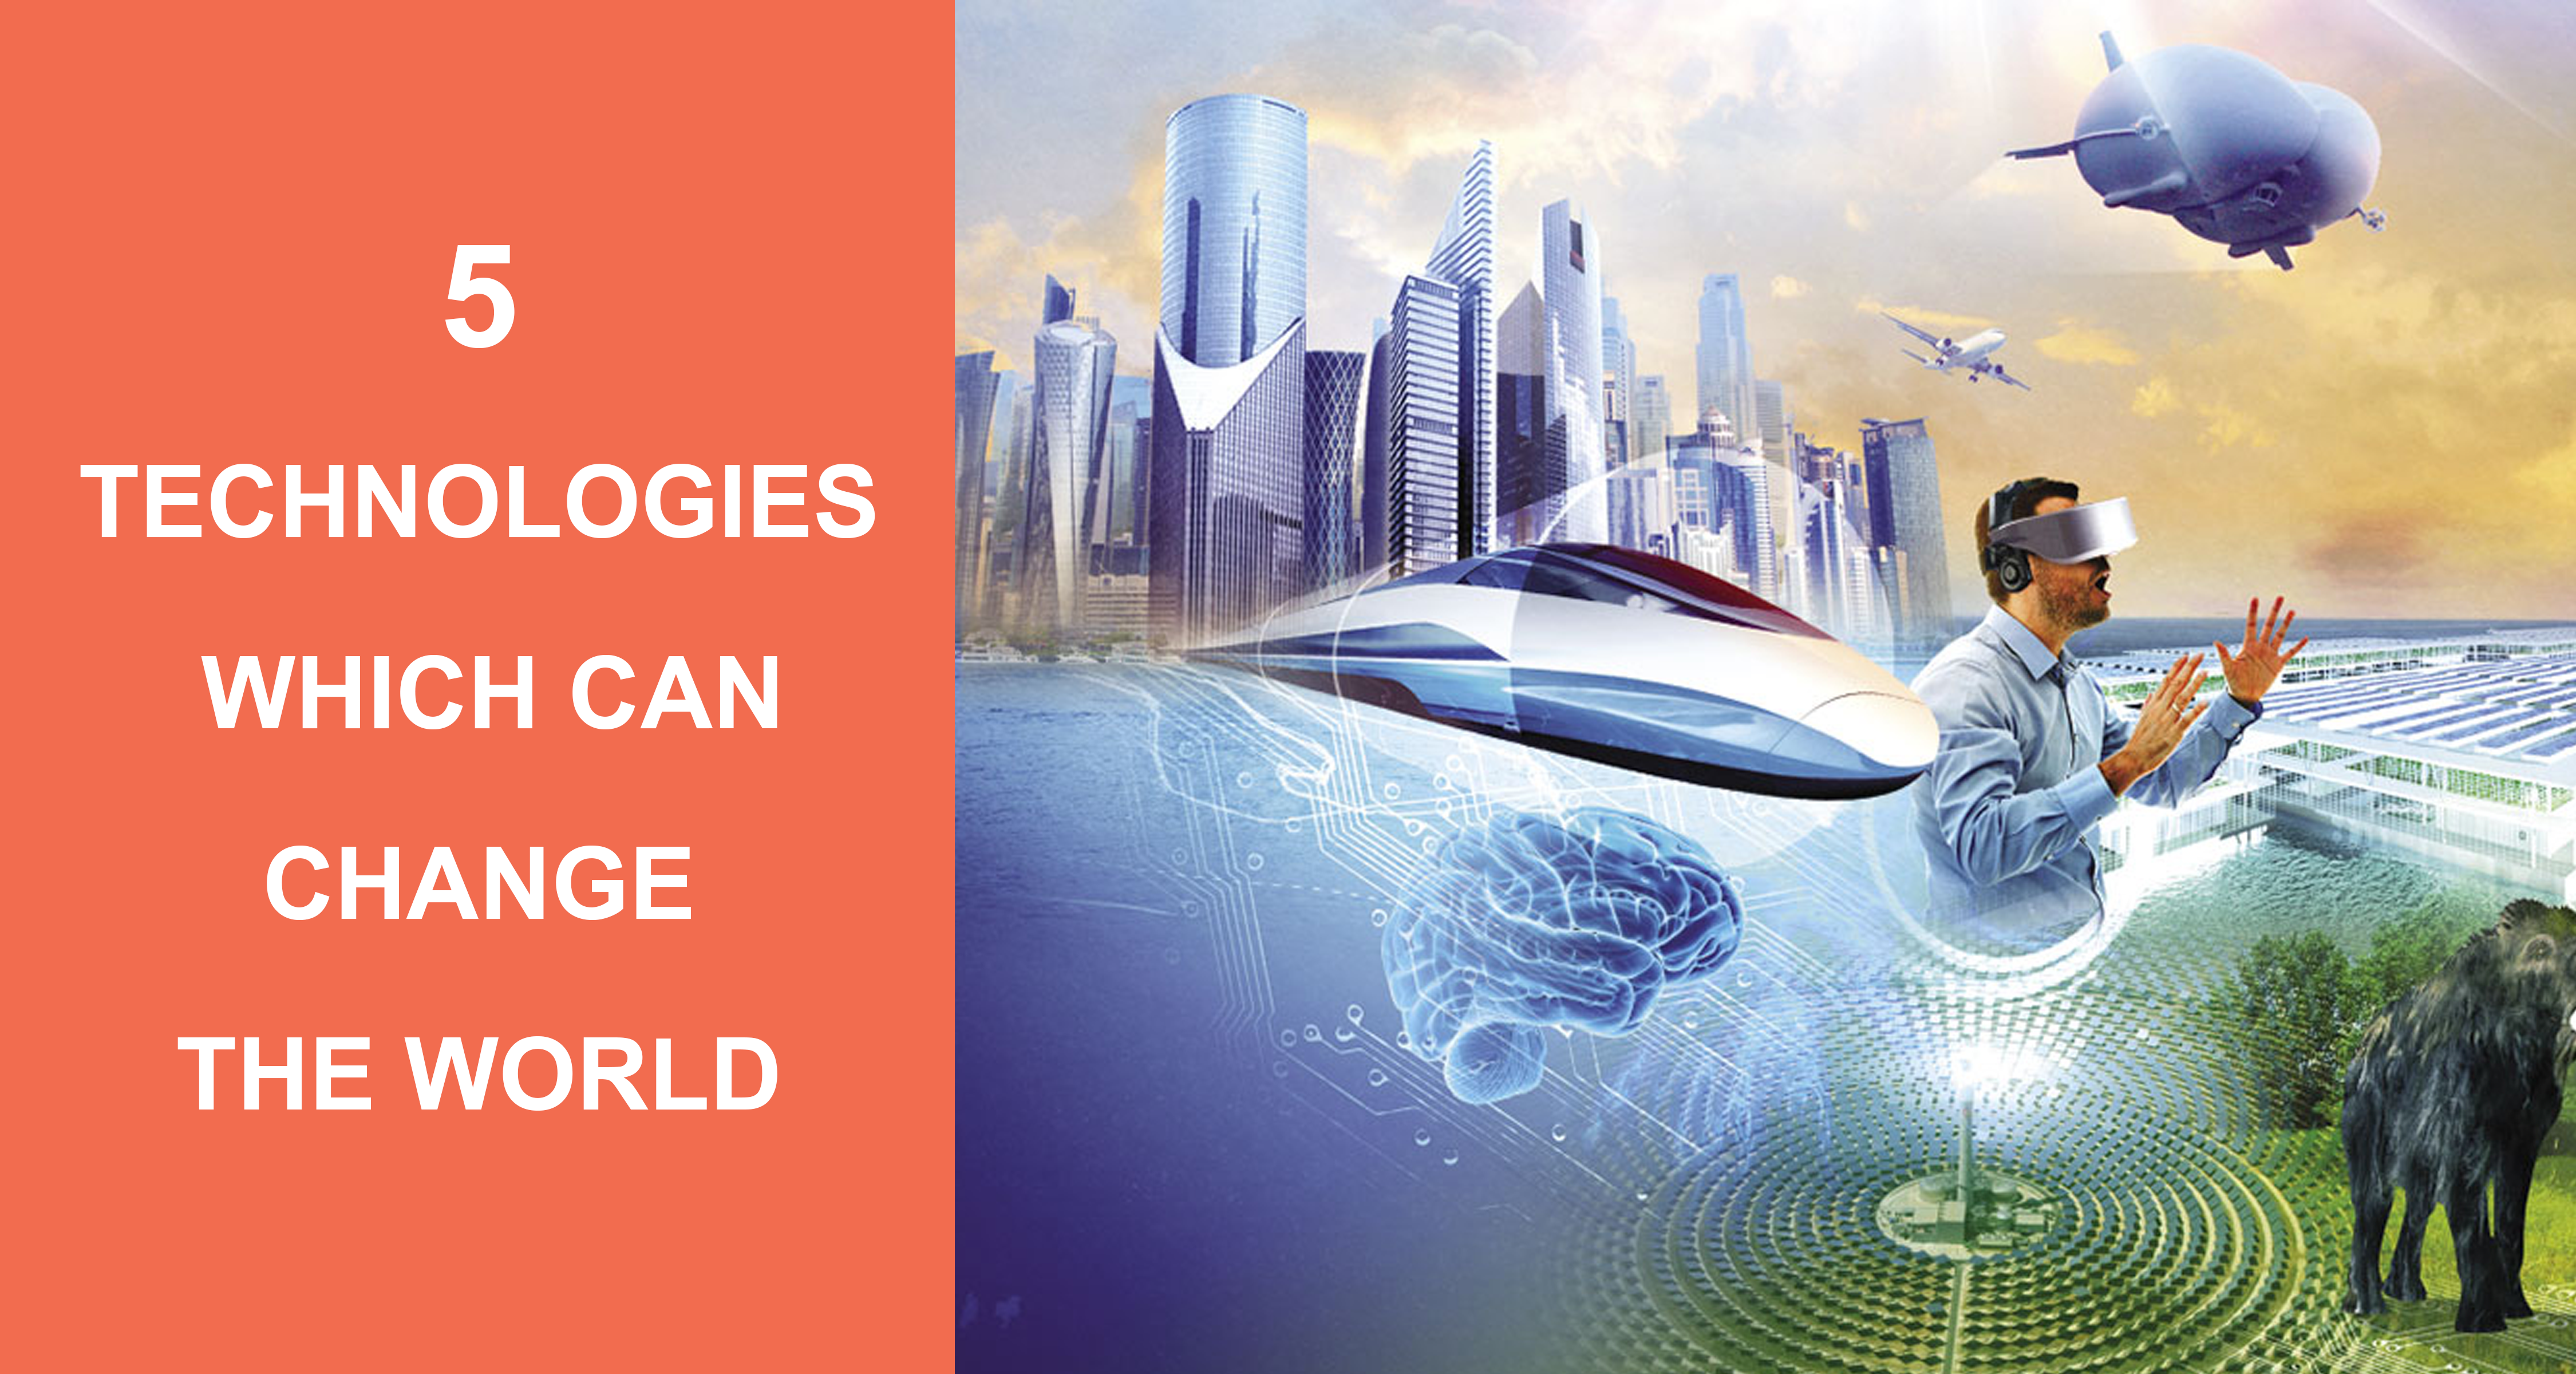 5 Technologies Which Can Change The World